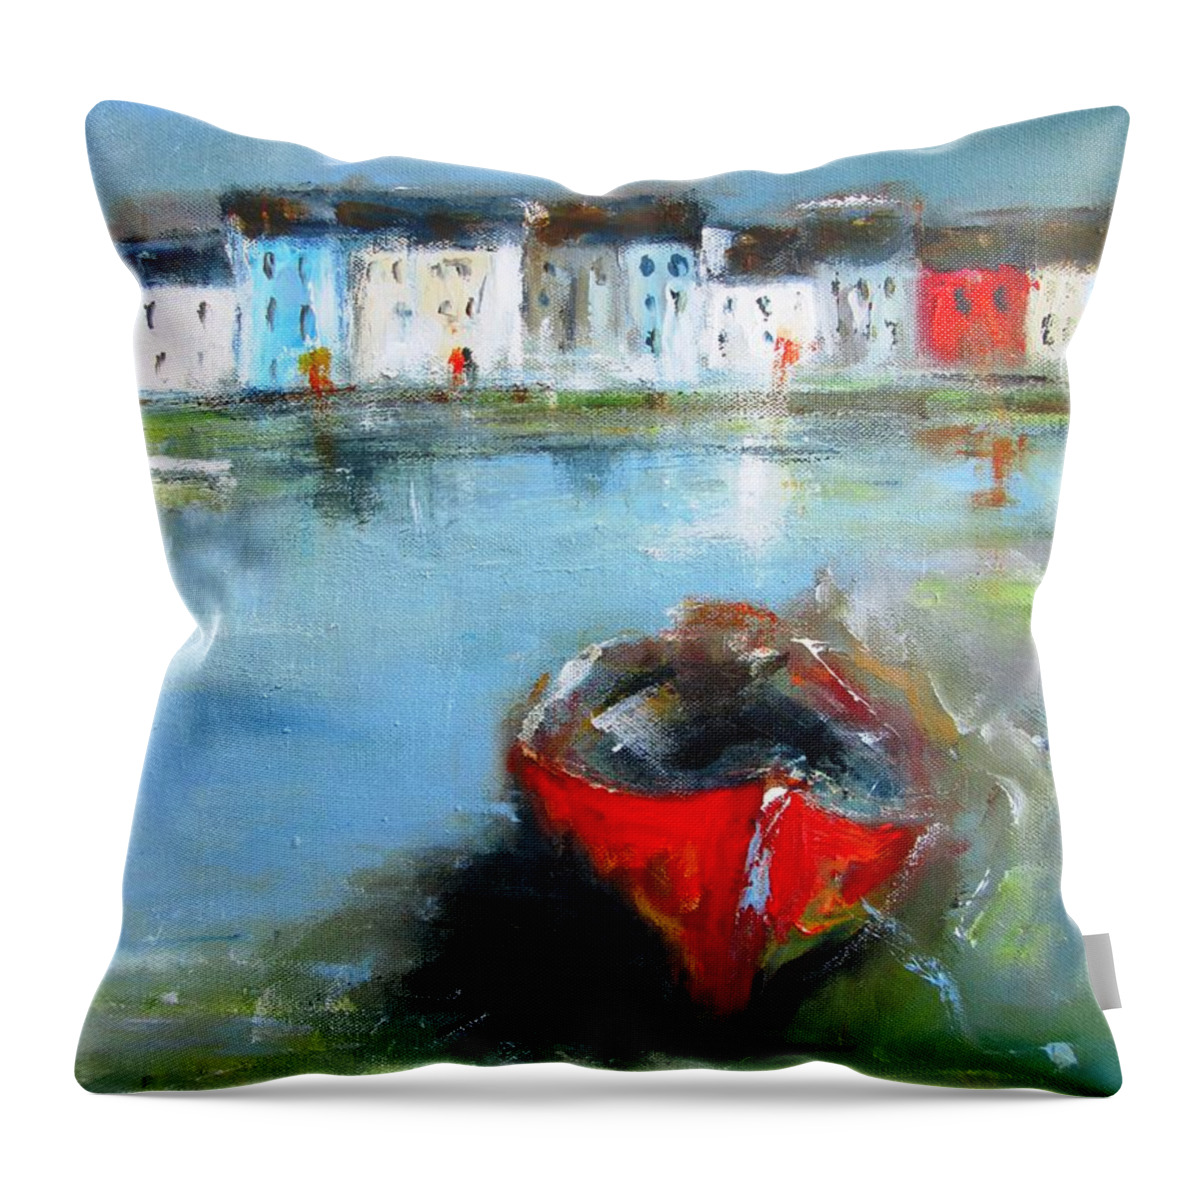 Galway Throw Pillow featuring the painting Galway City Ireland Semi Abstract Paintings #1 by Mary Cahalan Lee - aka PIXI